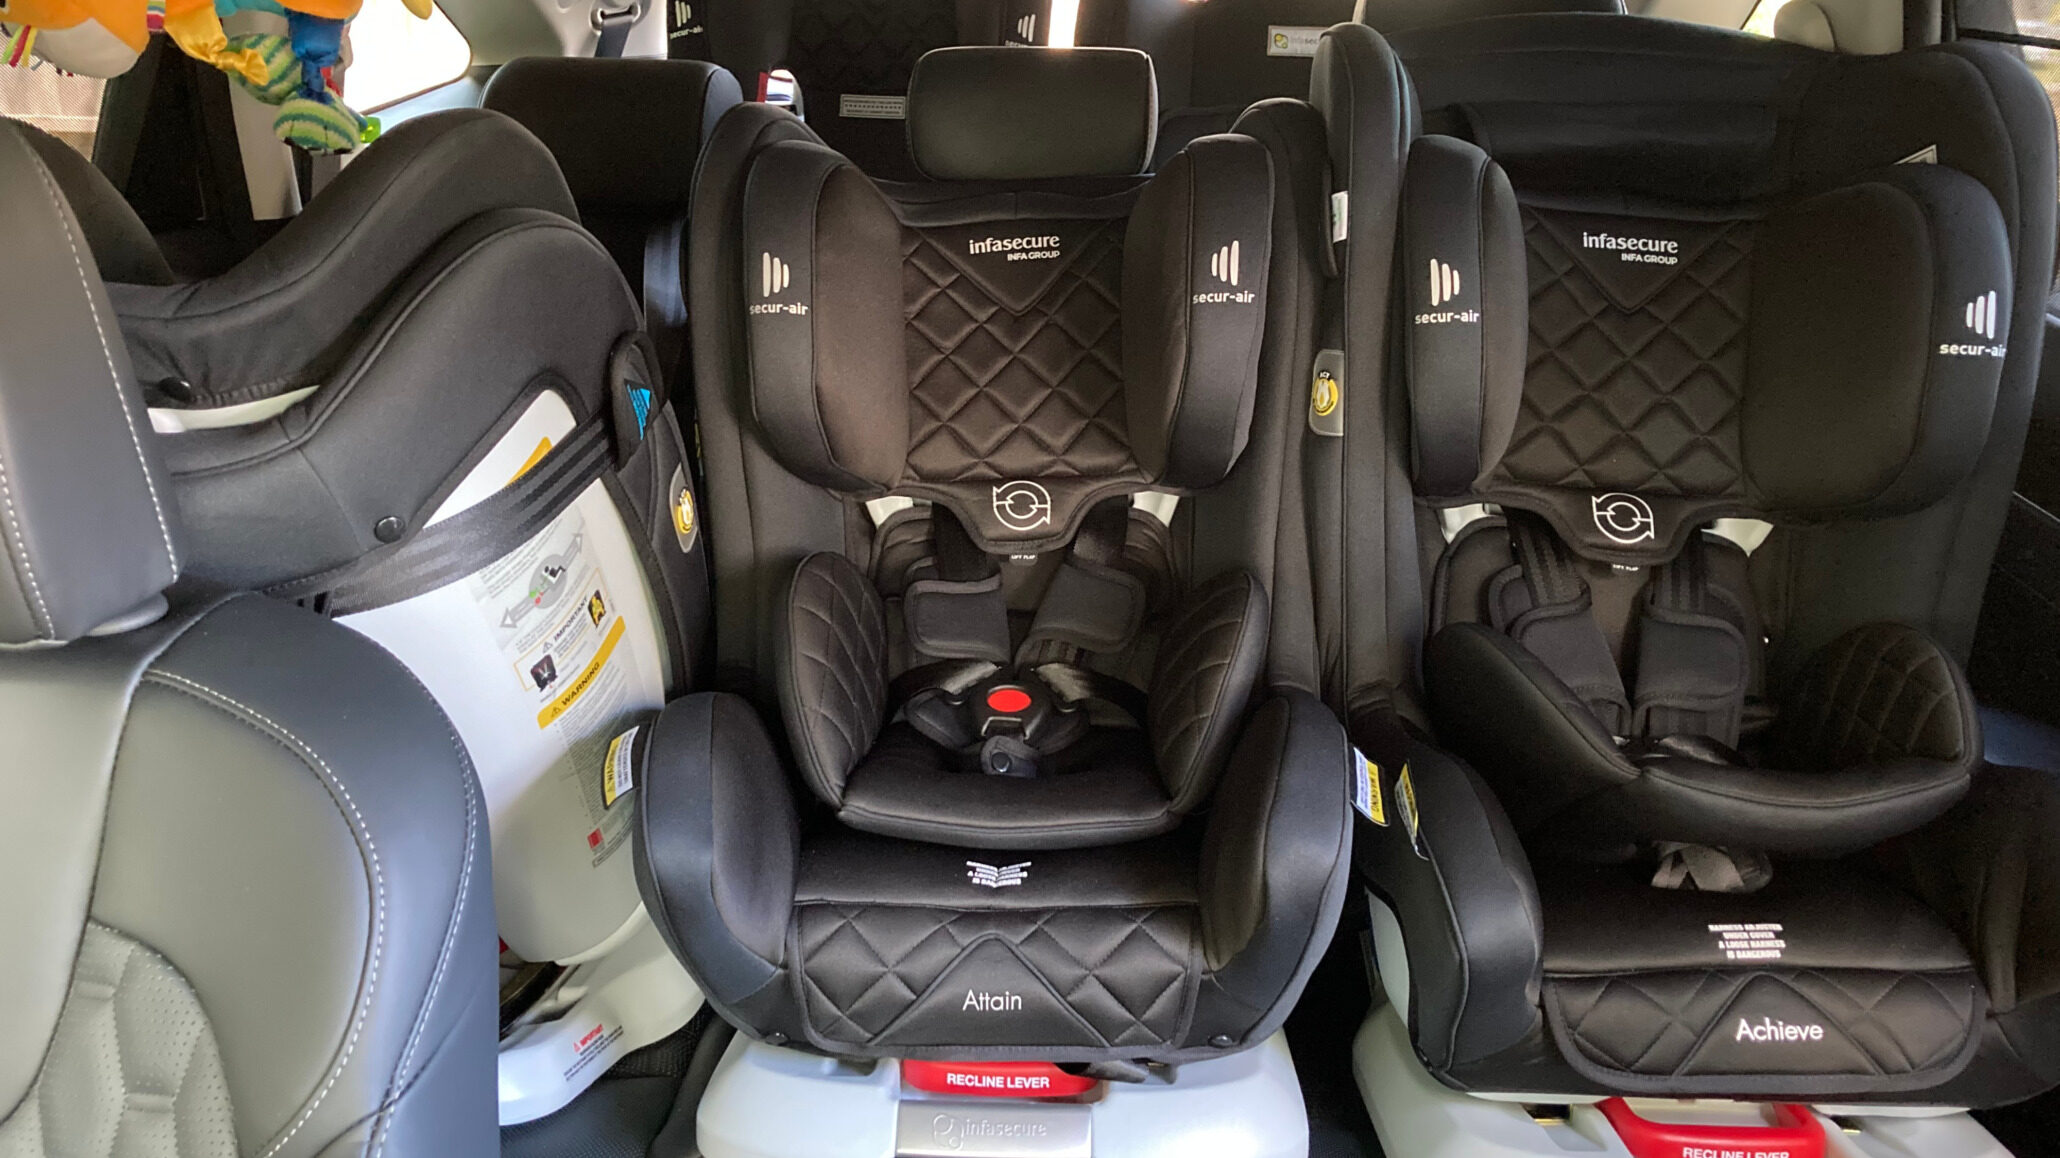 Cars With Built-in Booster Seats: Which Models Offer Integrated